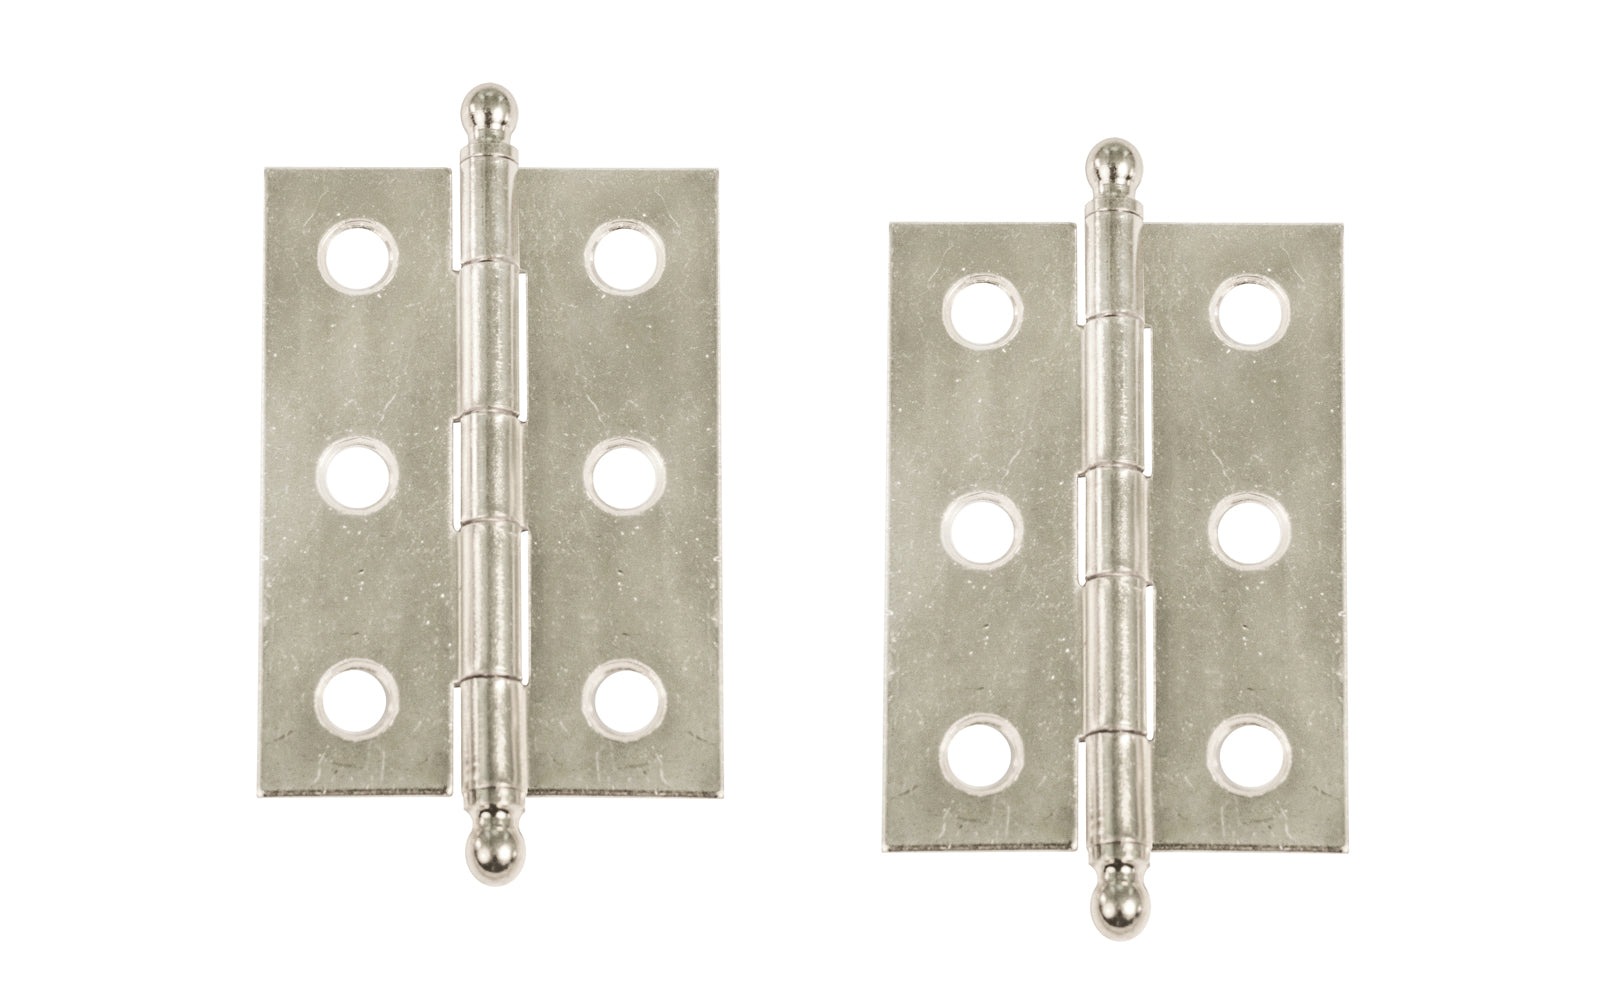 Traditional & classic ball-tip steel cabinet hinges with loose pins. Removable hinge pins which makes for easy installation when working with cabinets. 2" high x 1-3/8" wide. Sold as a pair of hinges. Polished Nickel Finish.